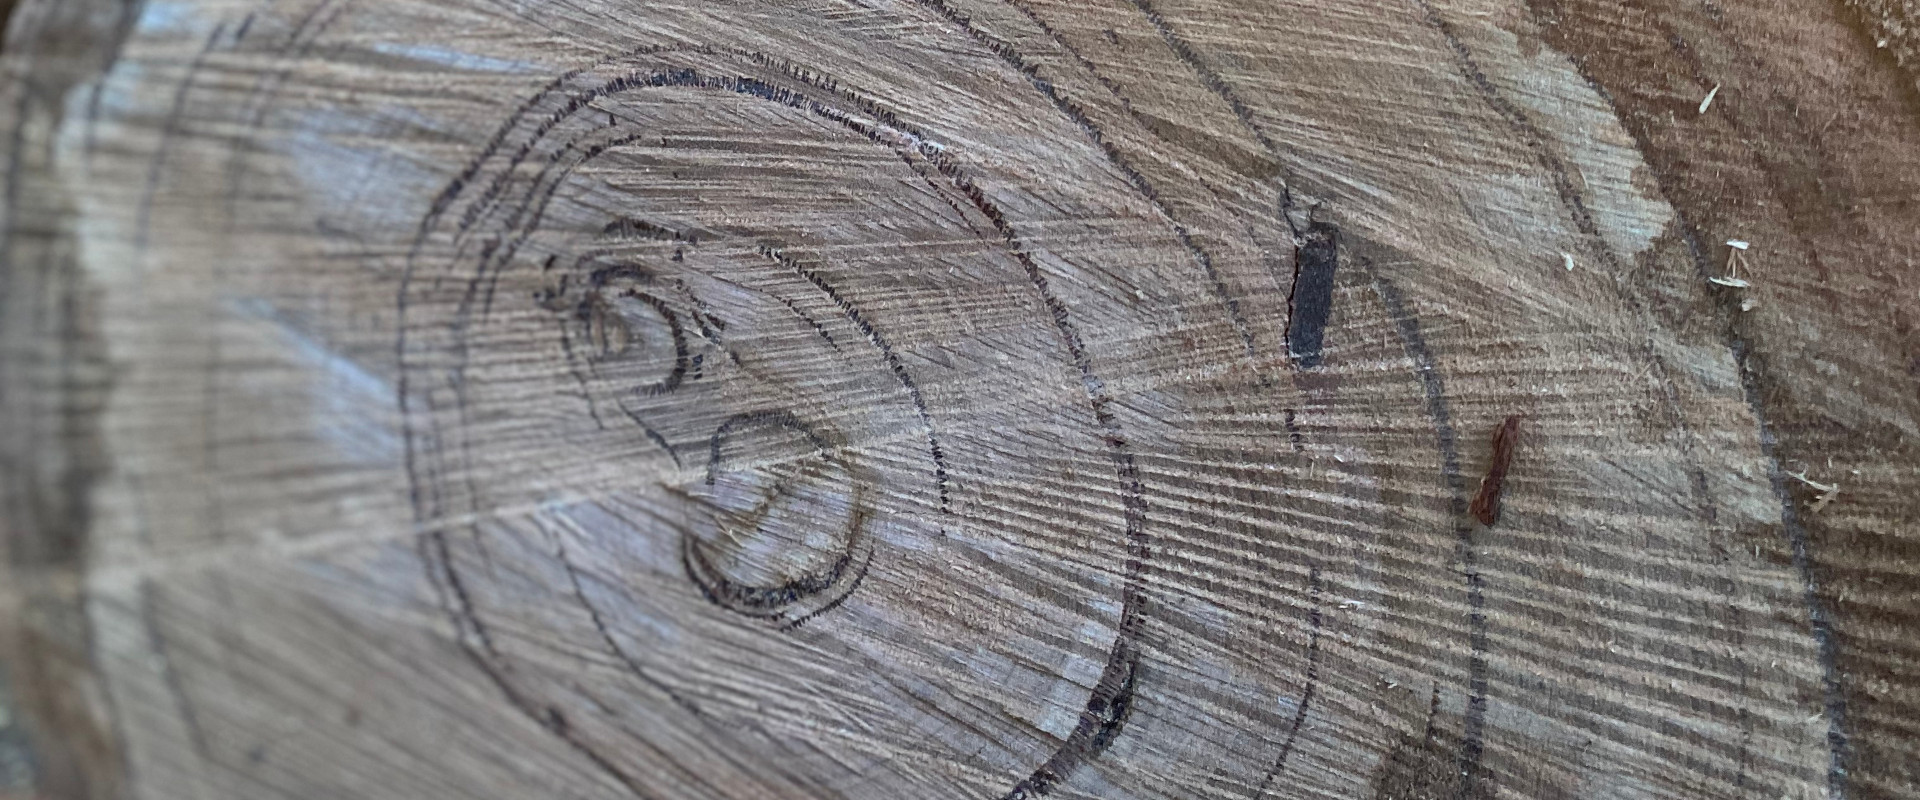 Close up of a cut log during land clearance.